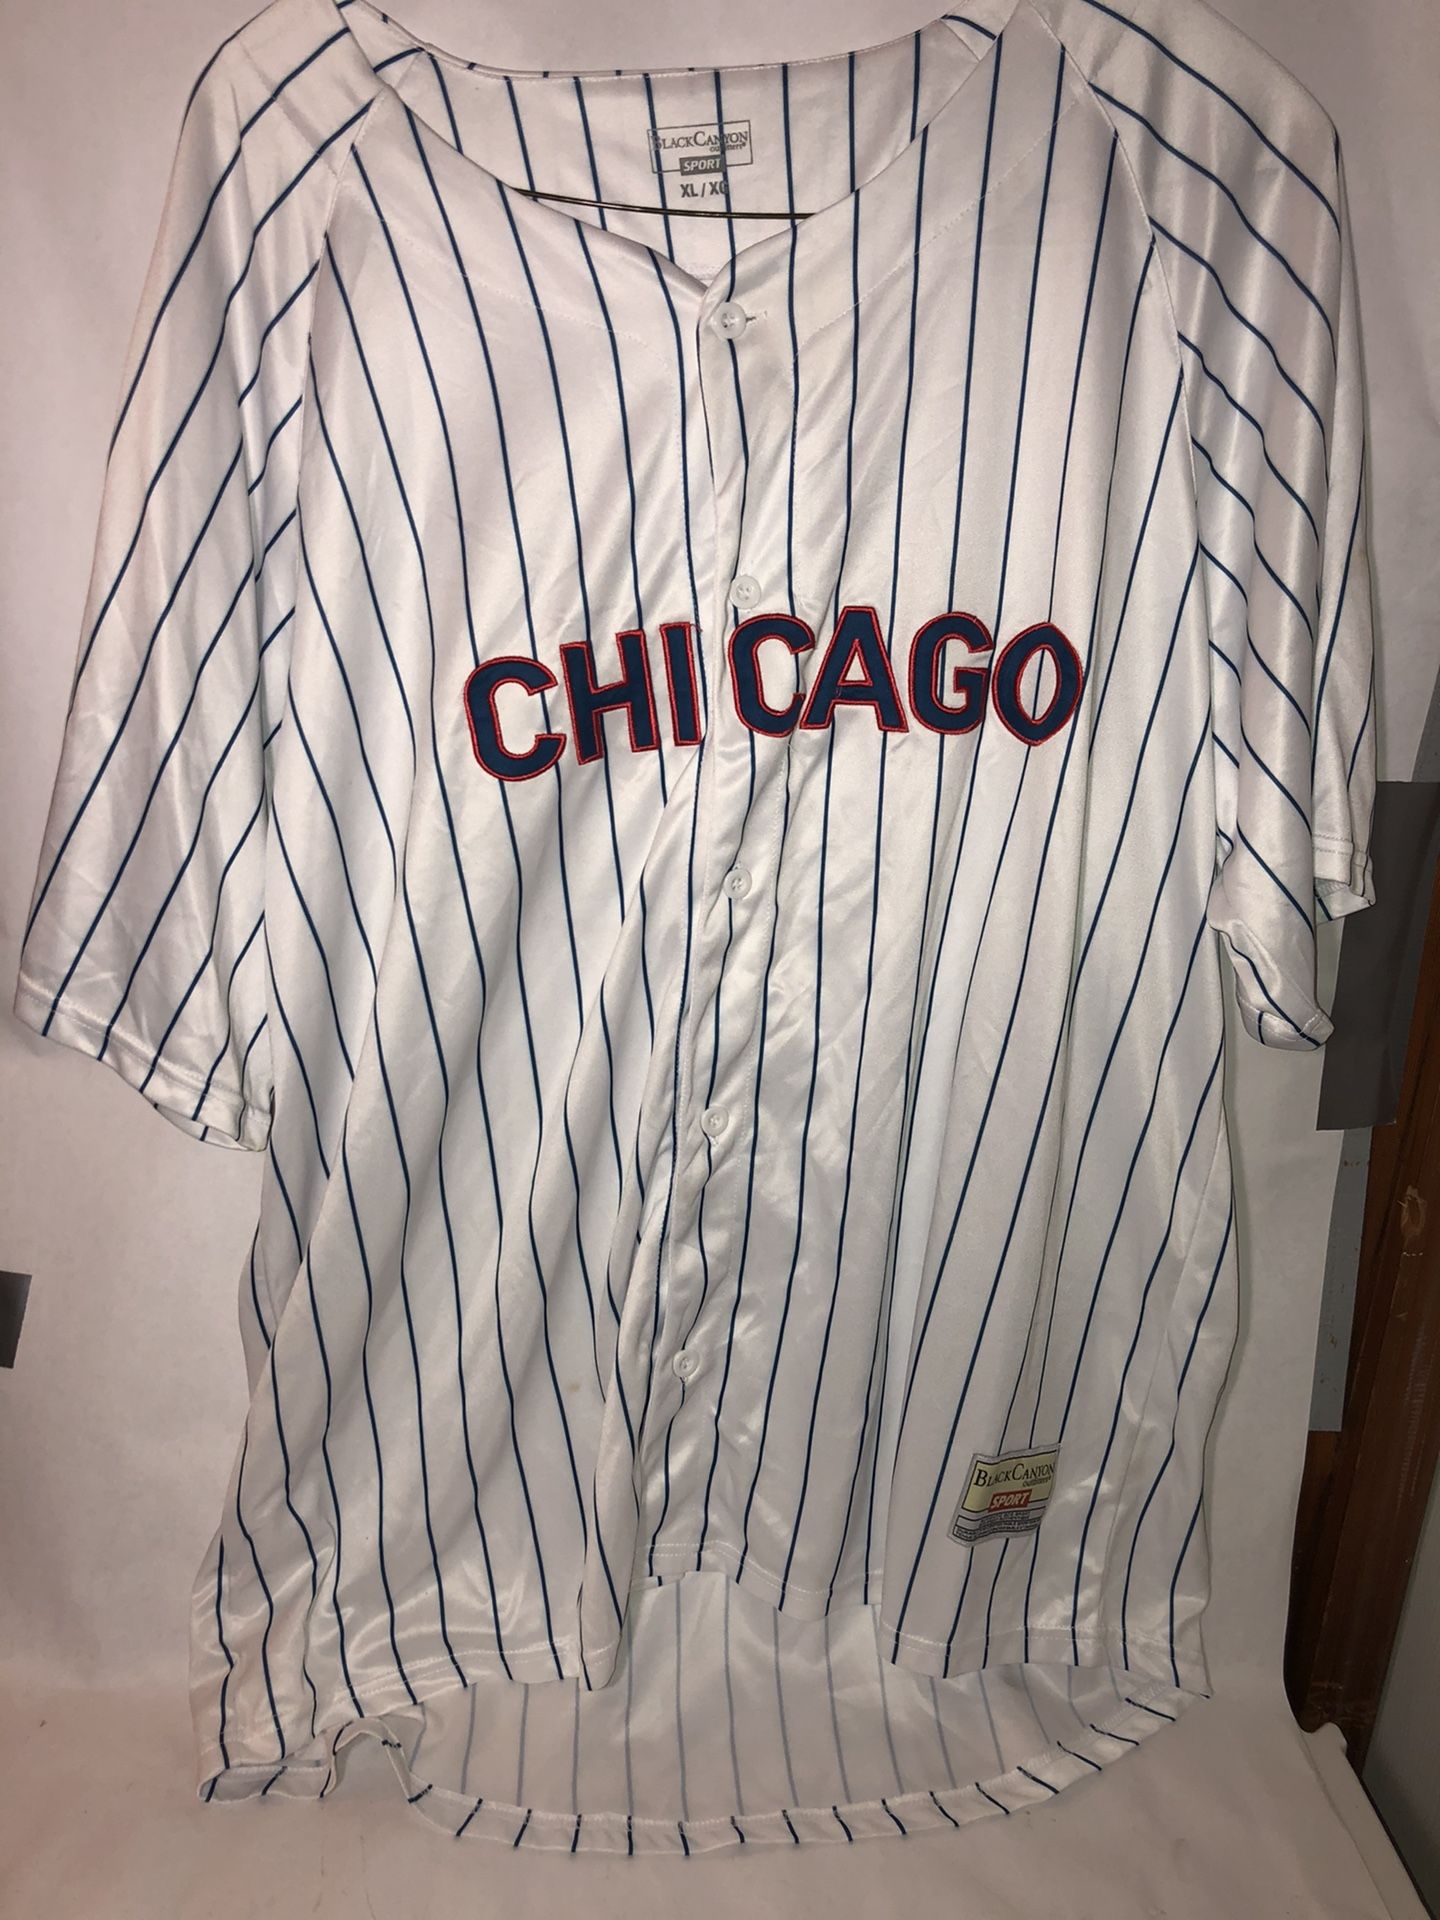 Canyon Outfitters Chicago Baseball Jersey Size XL - Fast Shipping!